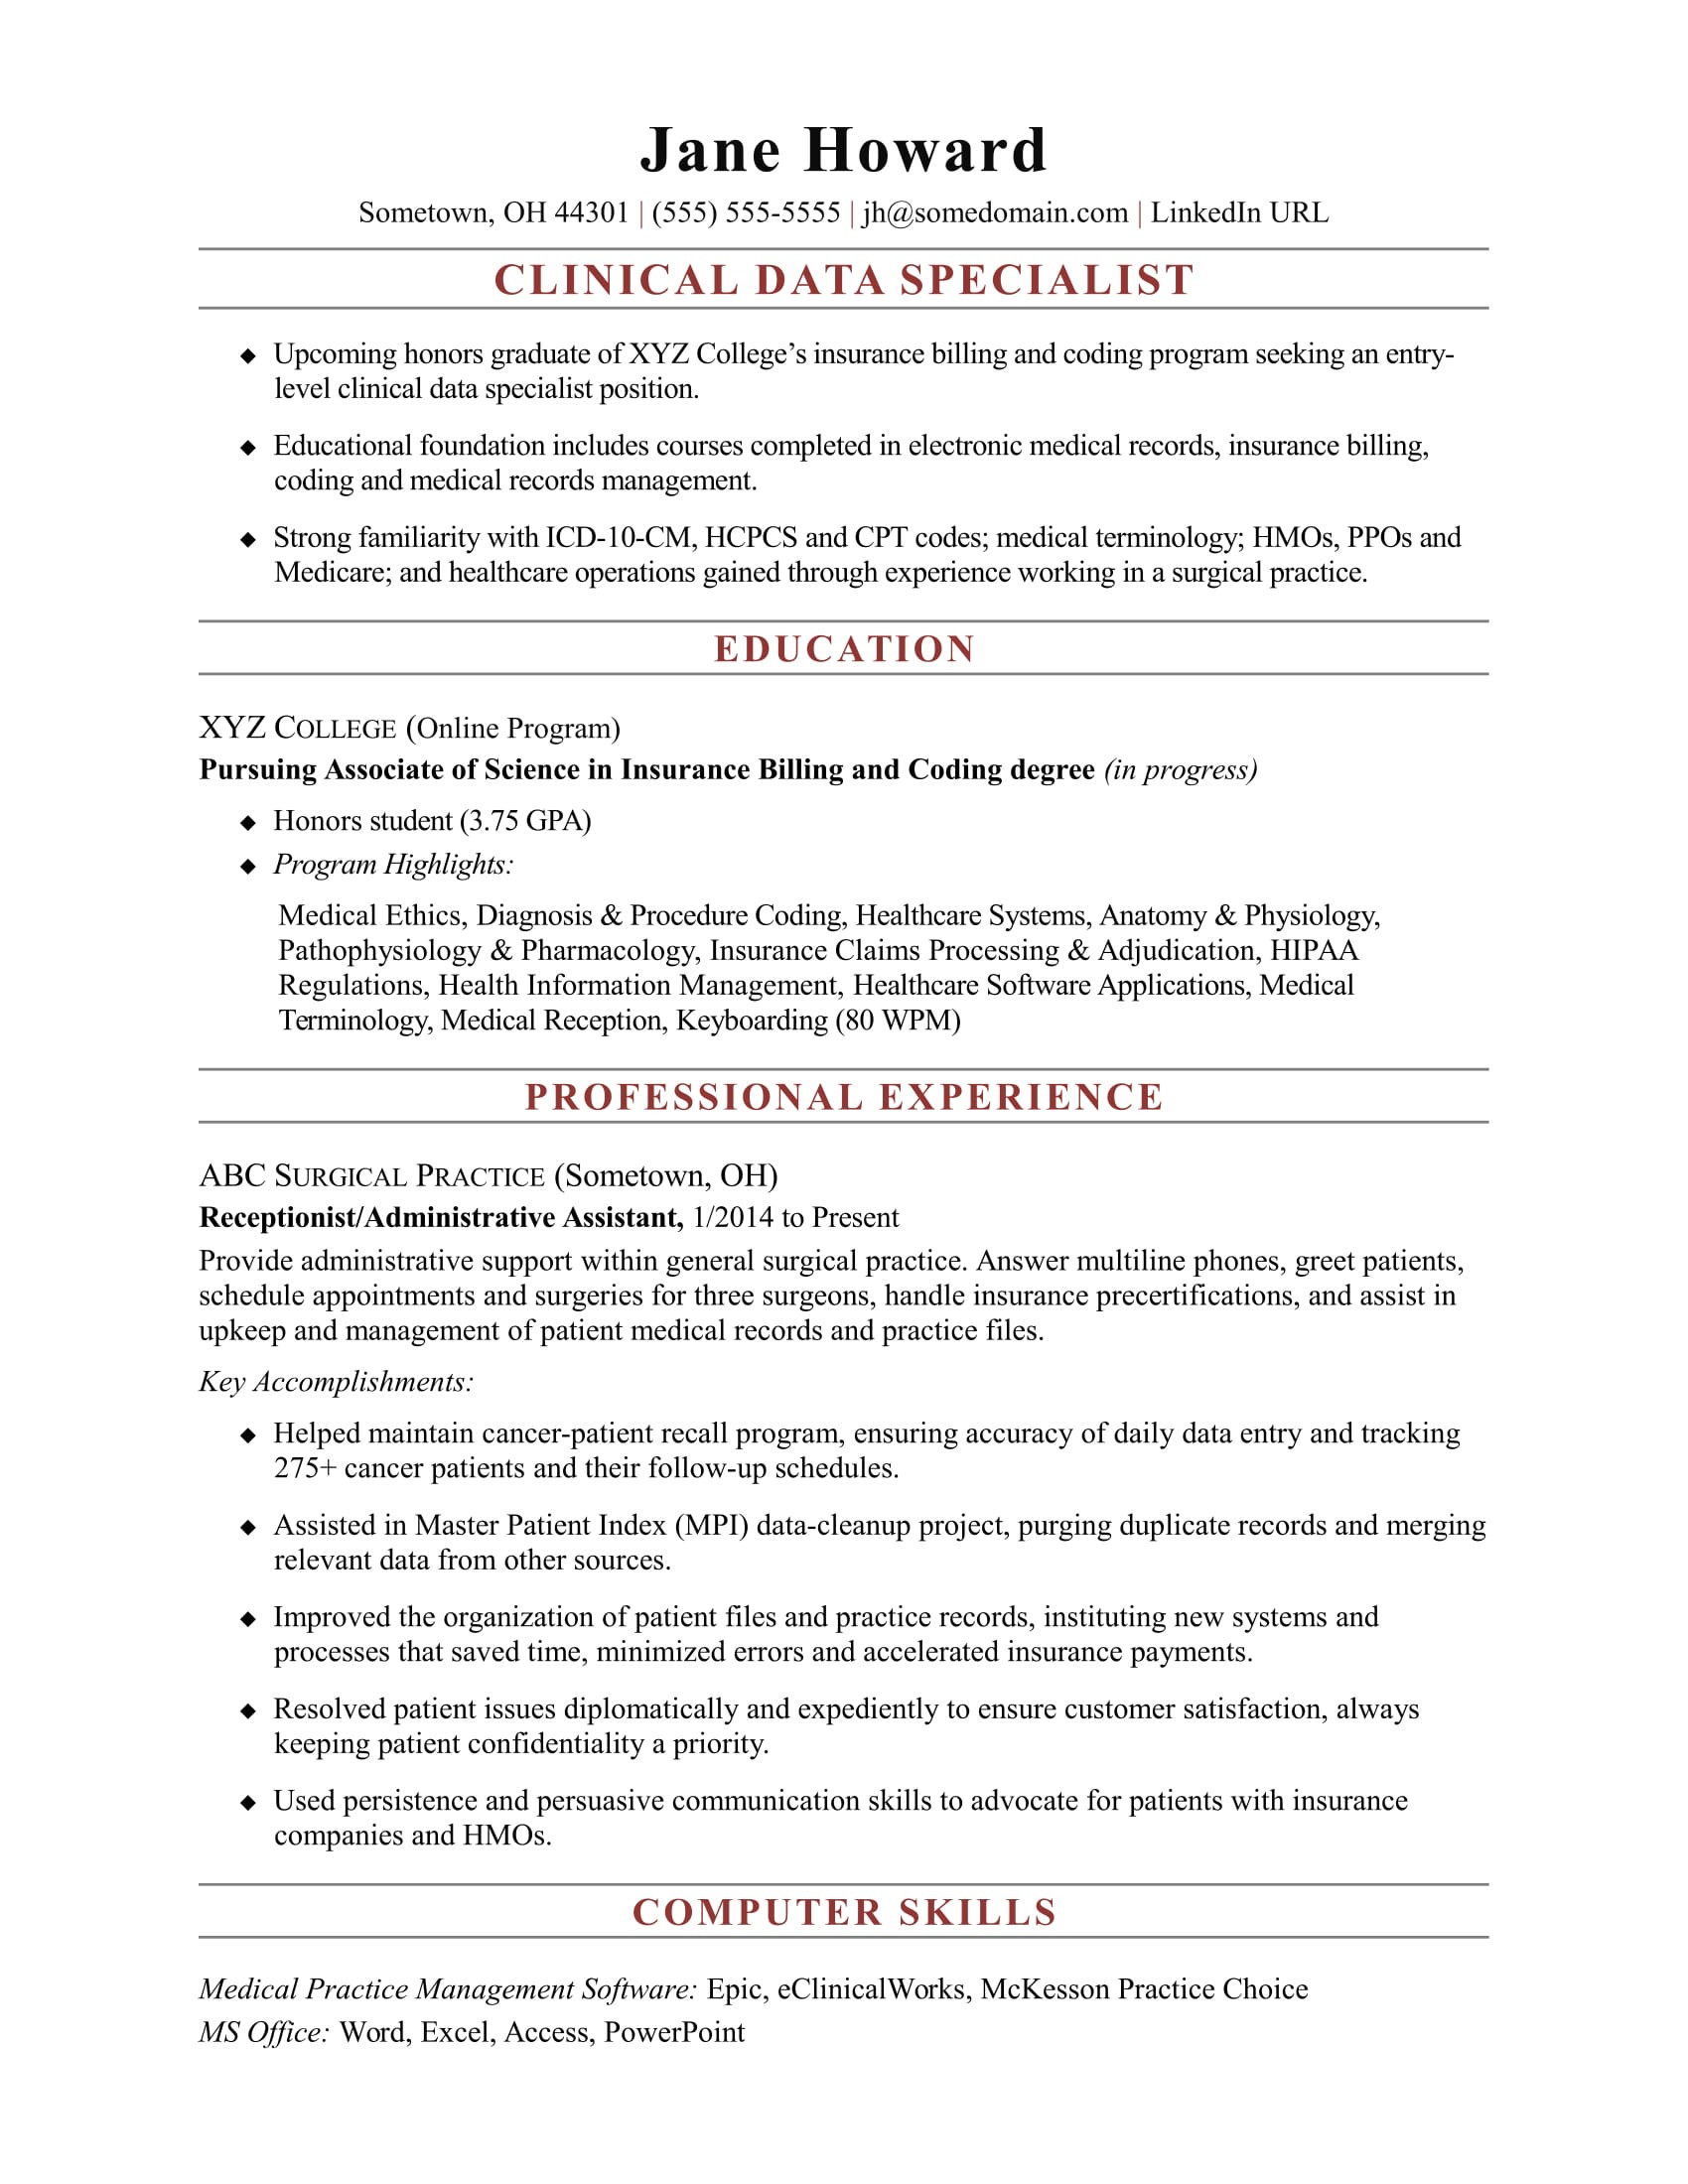 Rec attendant Sample Resume No Experience Entry-level Clinical Data Specialist Resume Sample Monster.com